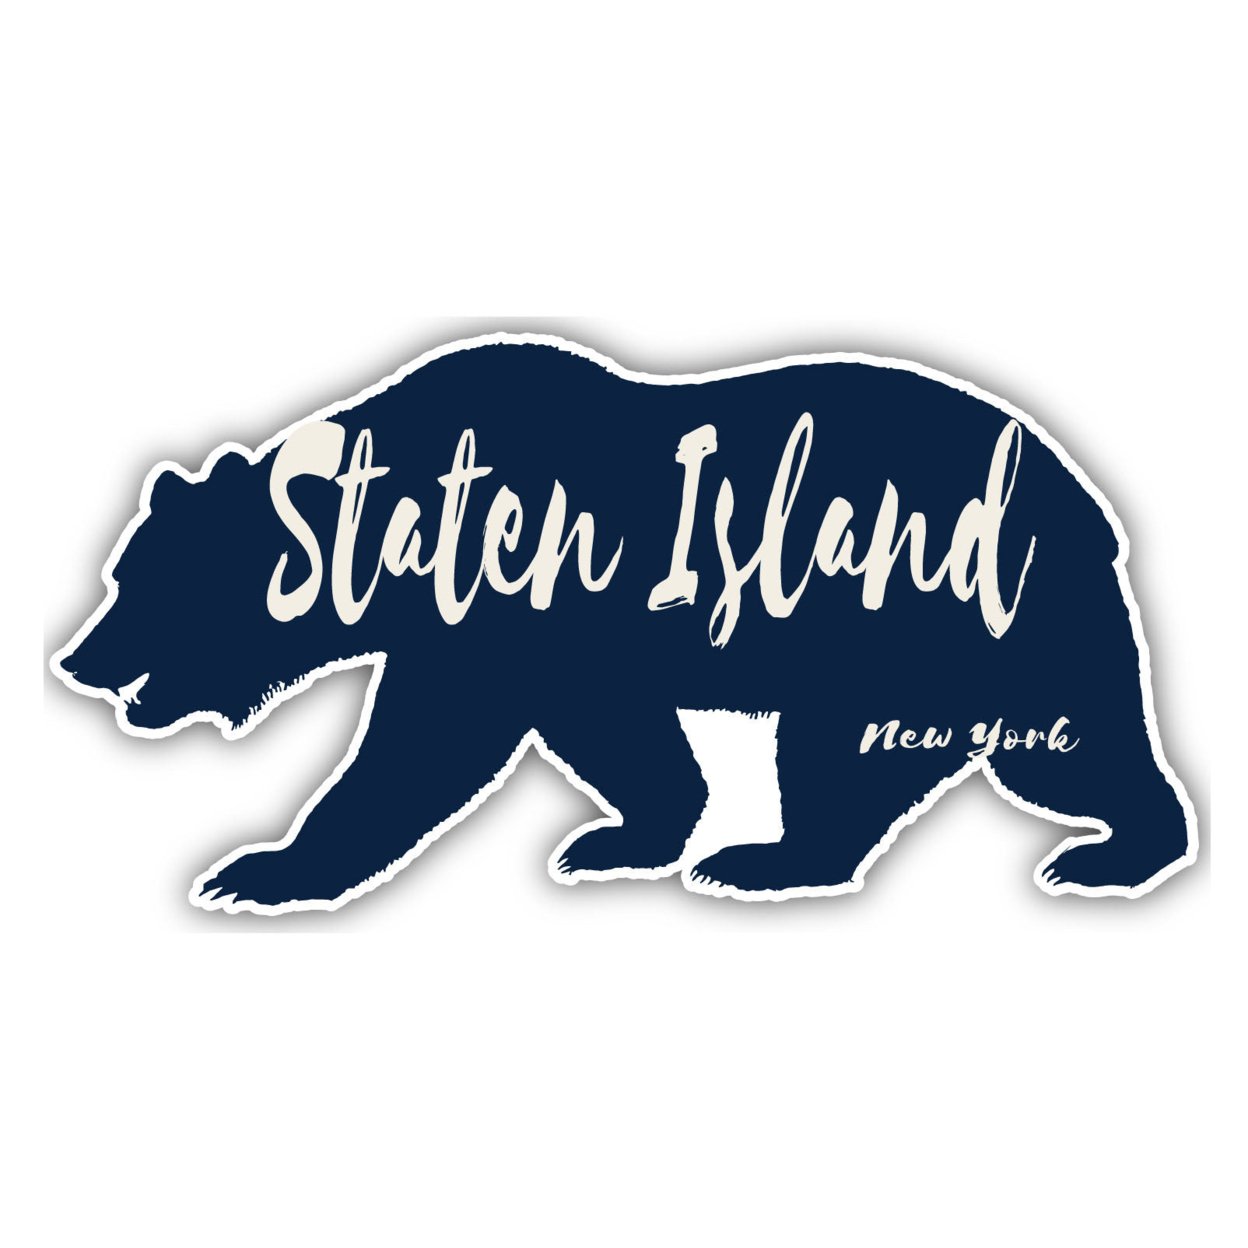 Staten Island New York Souvenir Decorative Stickers (Choose Theme And Size) - Single Unit, 2-Inch, Great Outdoors